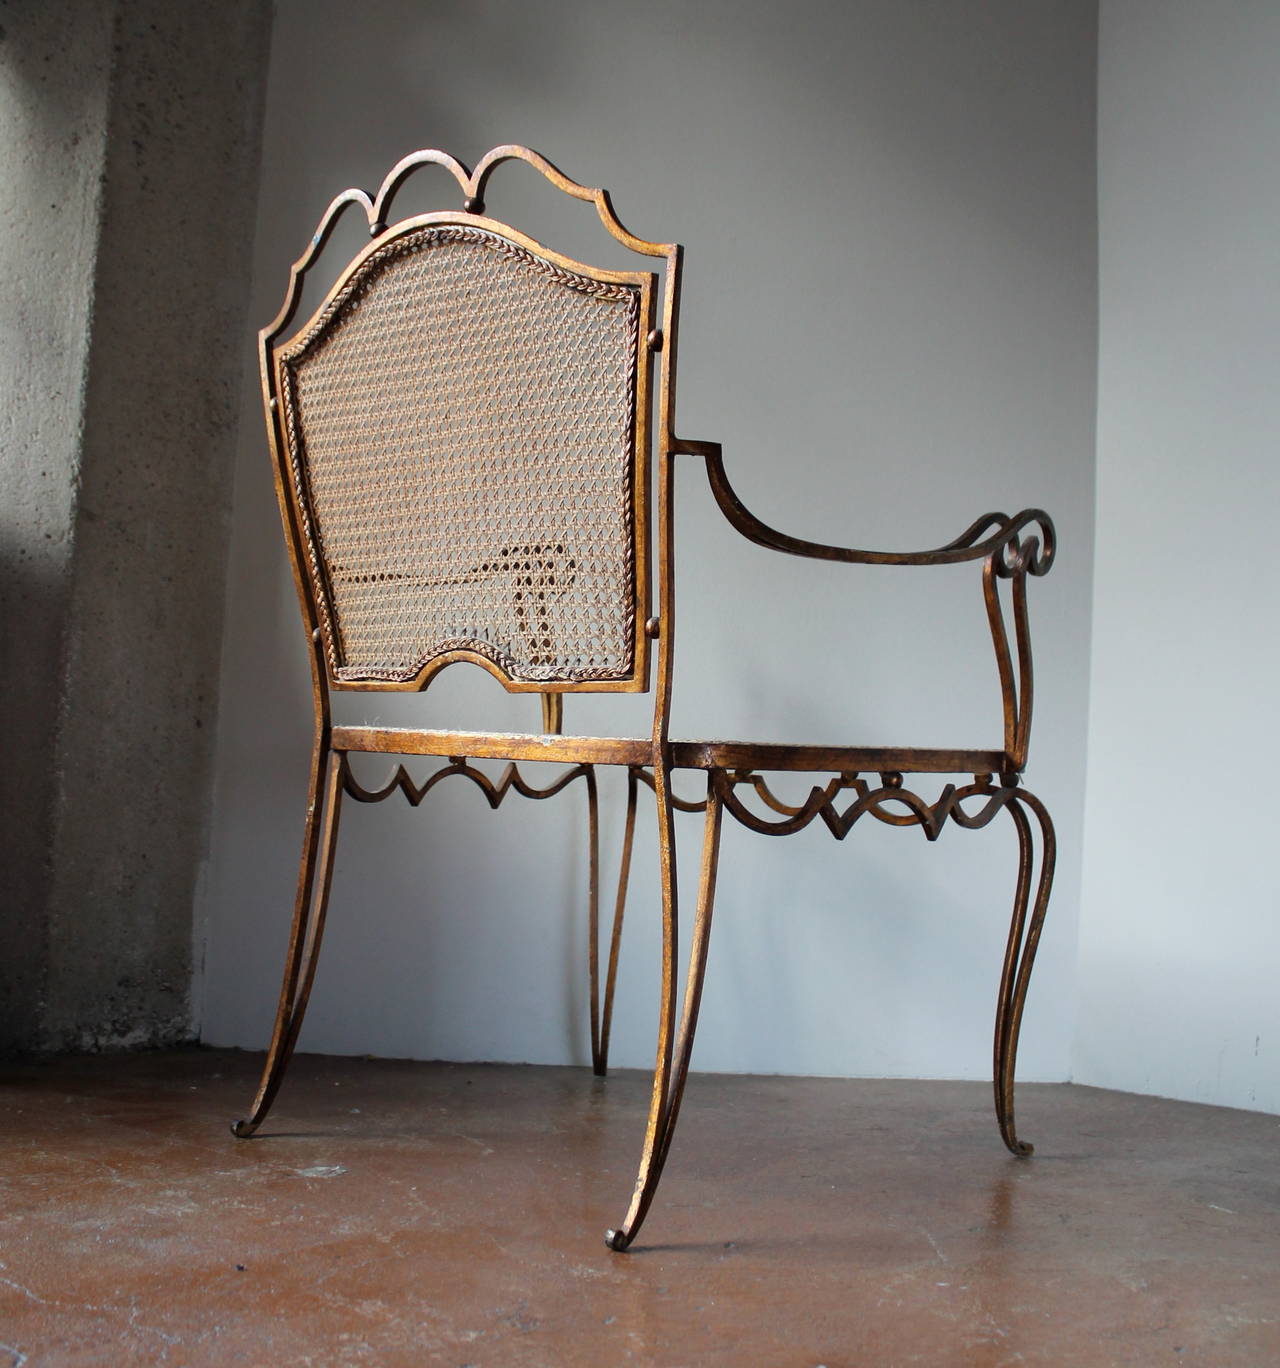 Rare Set of Four Arturo Pani Gilded Iron Armchairs, Mexico City, 1940s In Good Condition For Sale In San Diego, CA